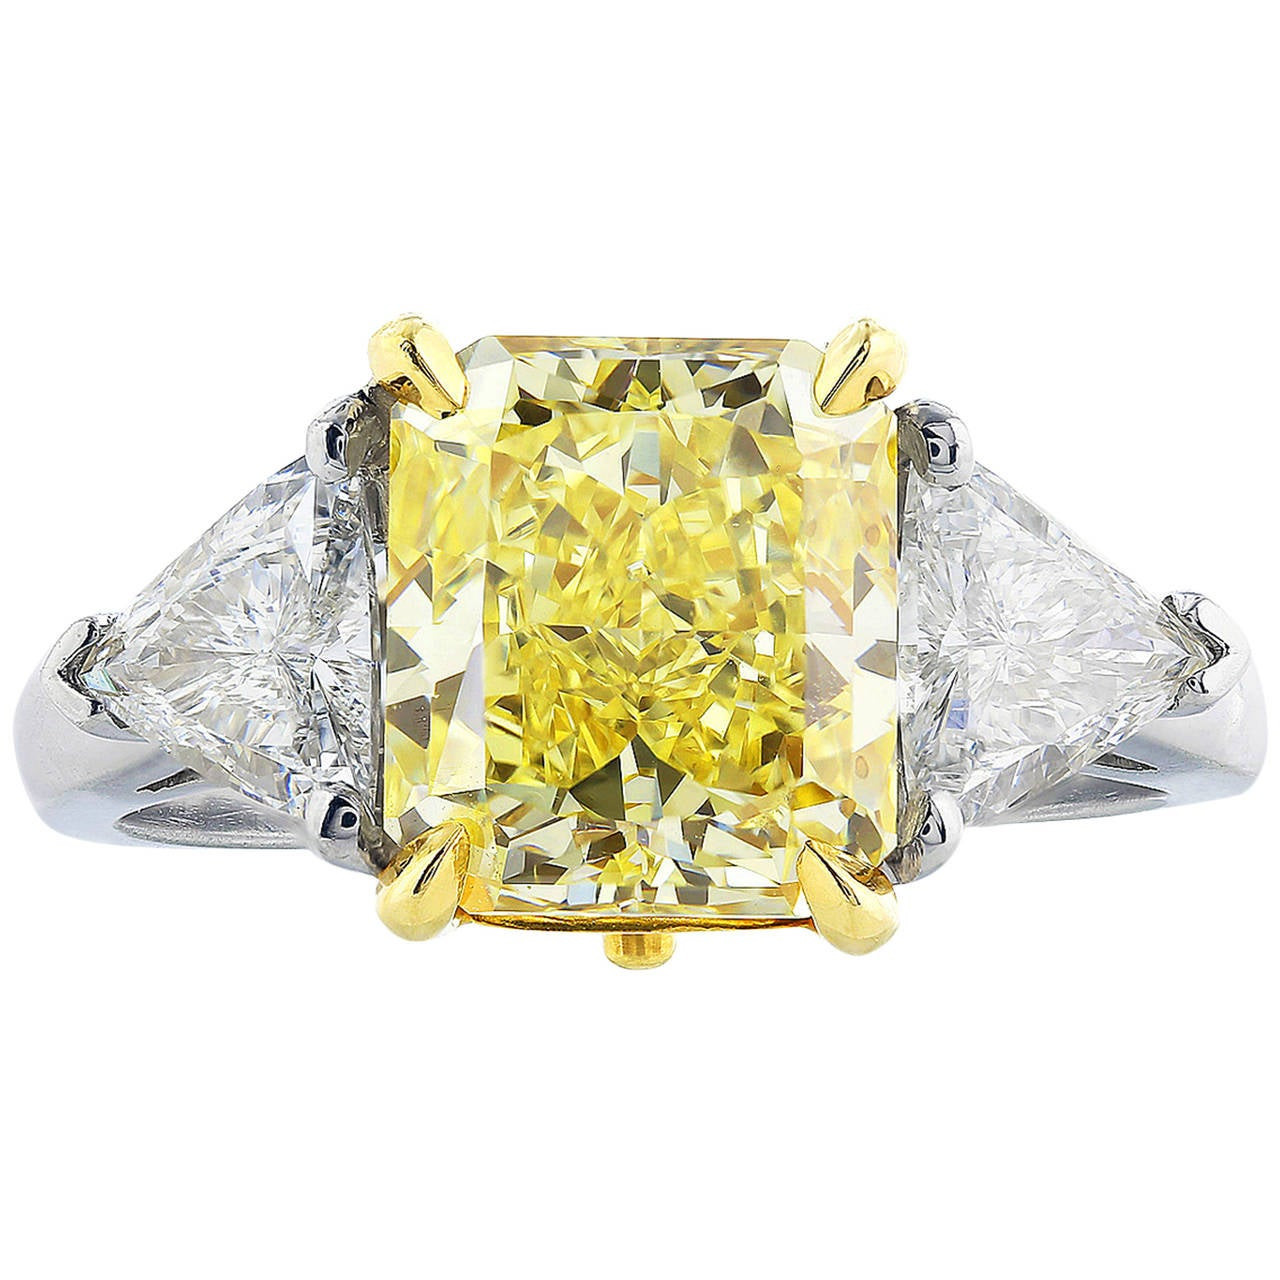 Yellow Diamond Rings
 3 01 Carat Radiant Fancy Yellow Diamond Ring For Sale at